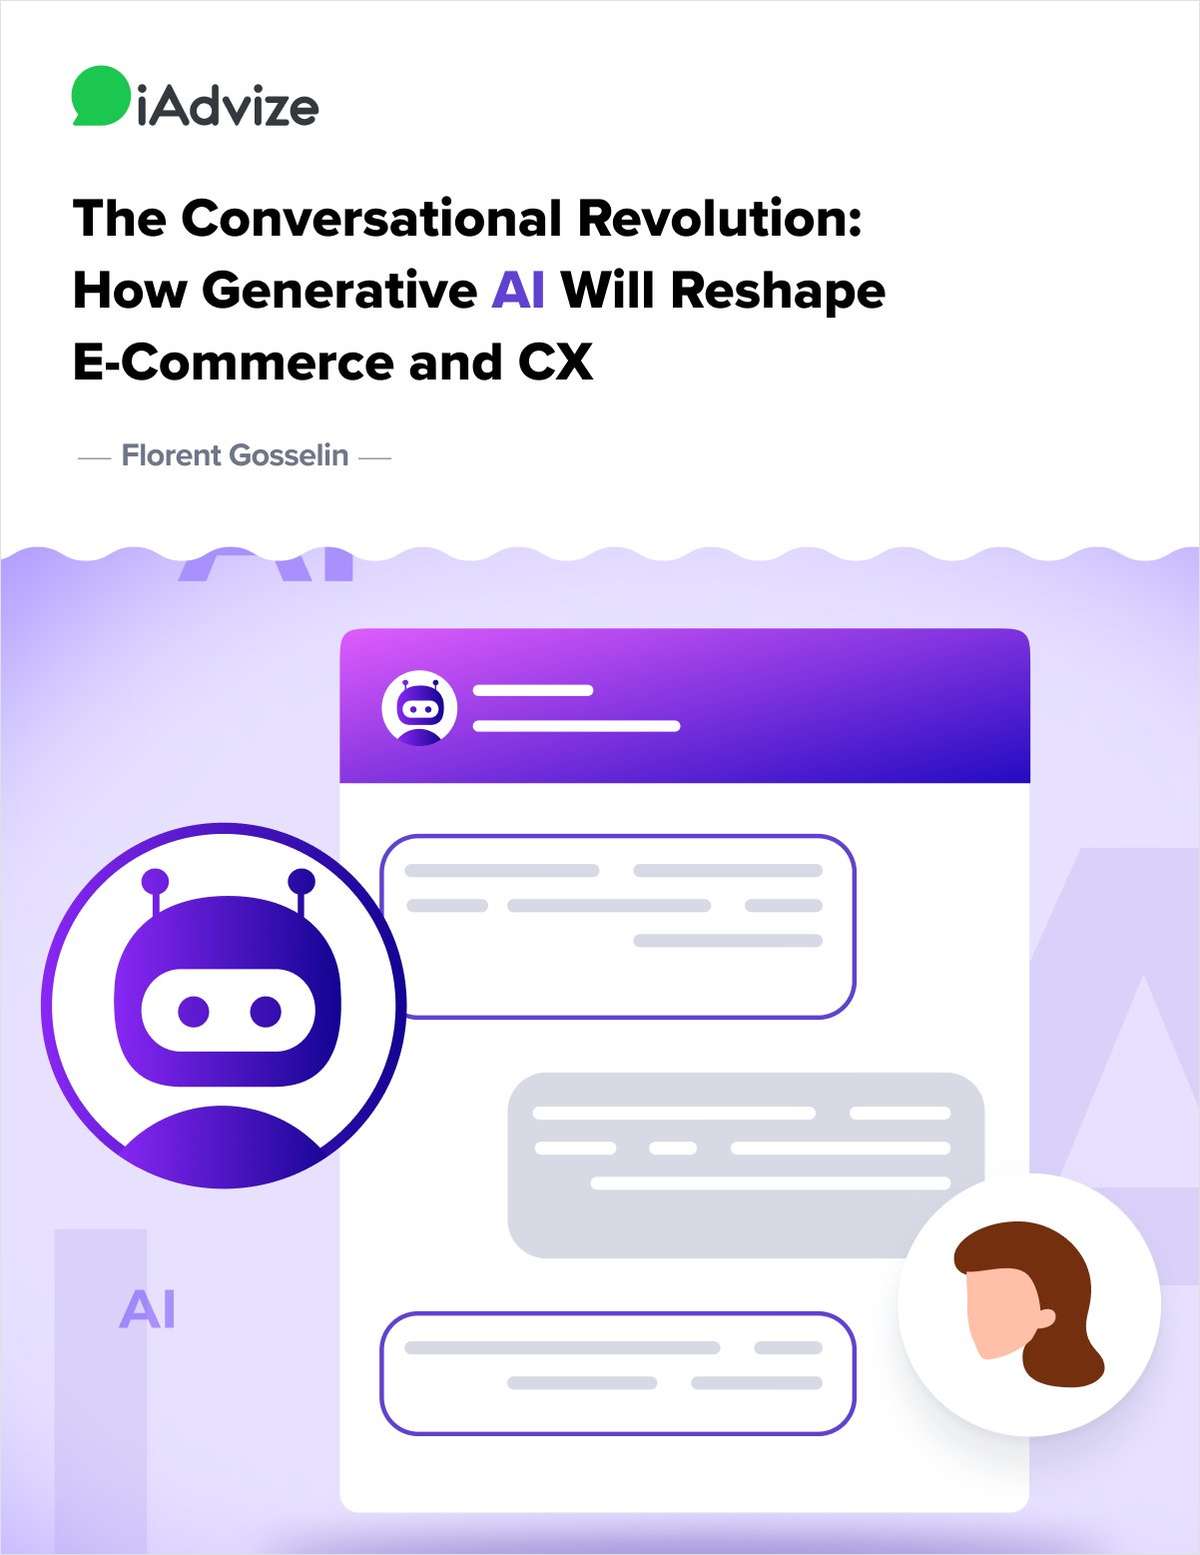 The Conversational Revolution: How Generative AI Will Reshape E-commerce and CX